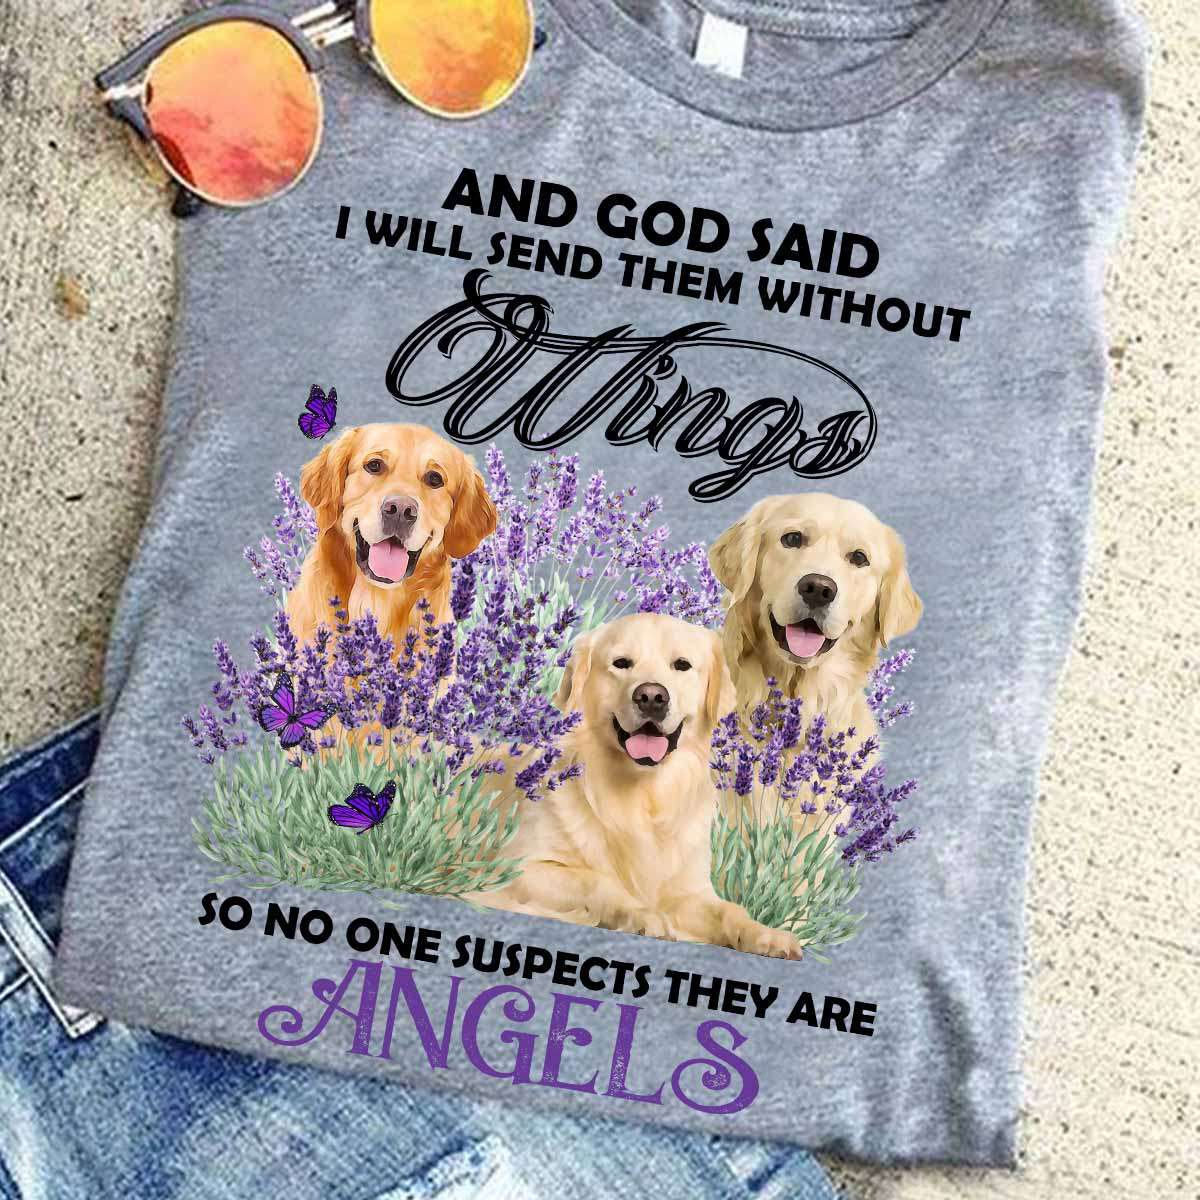 Golden Retriever - And god said i will send them without wings so no one suspects they are angles